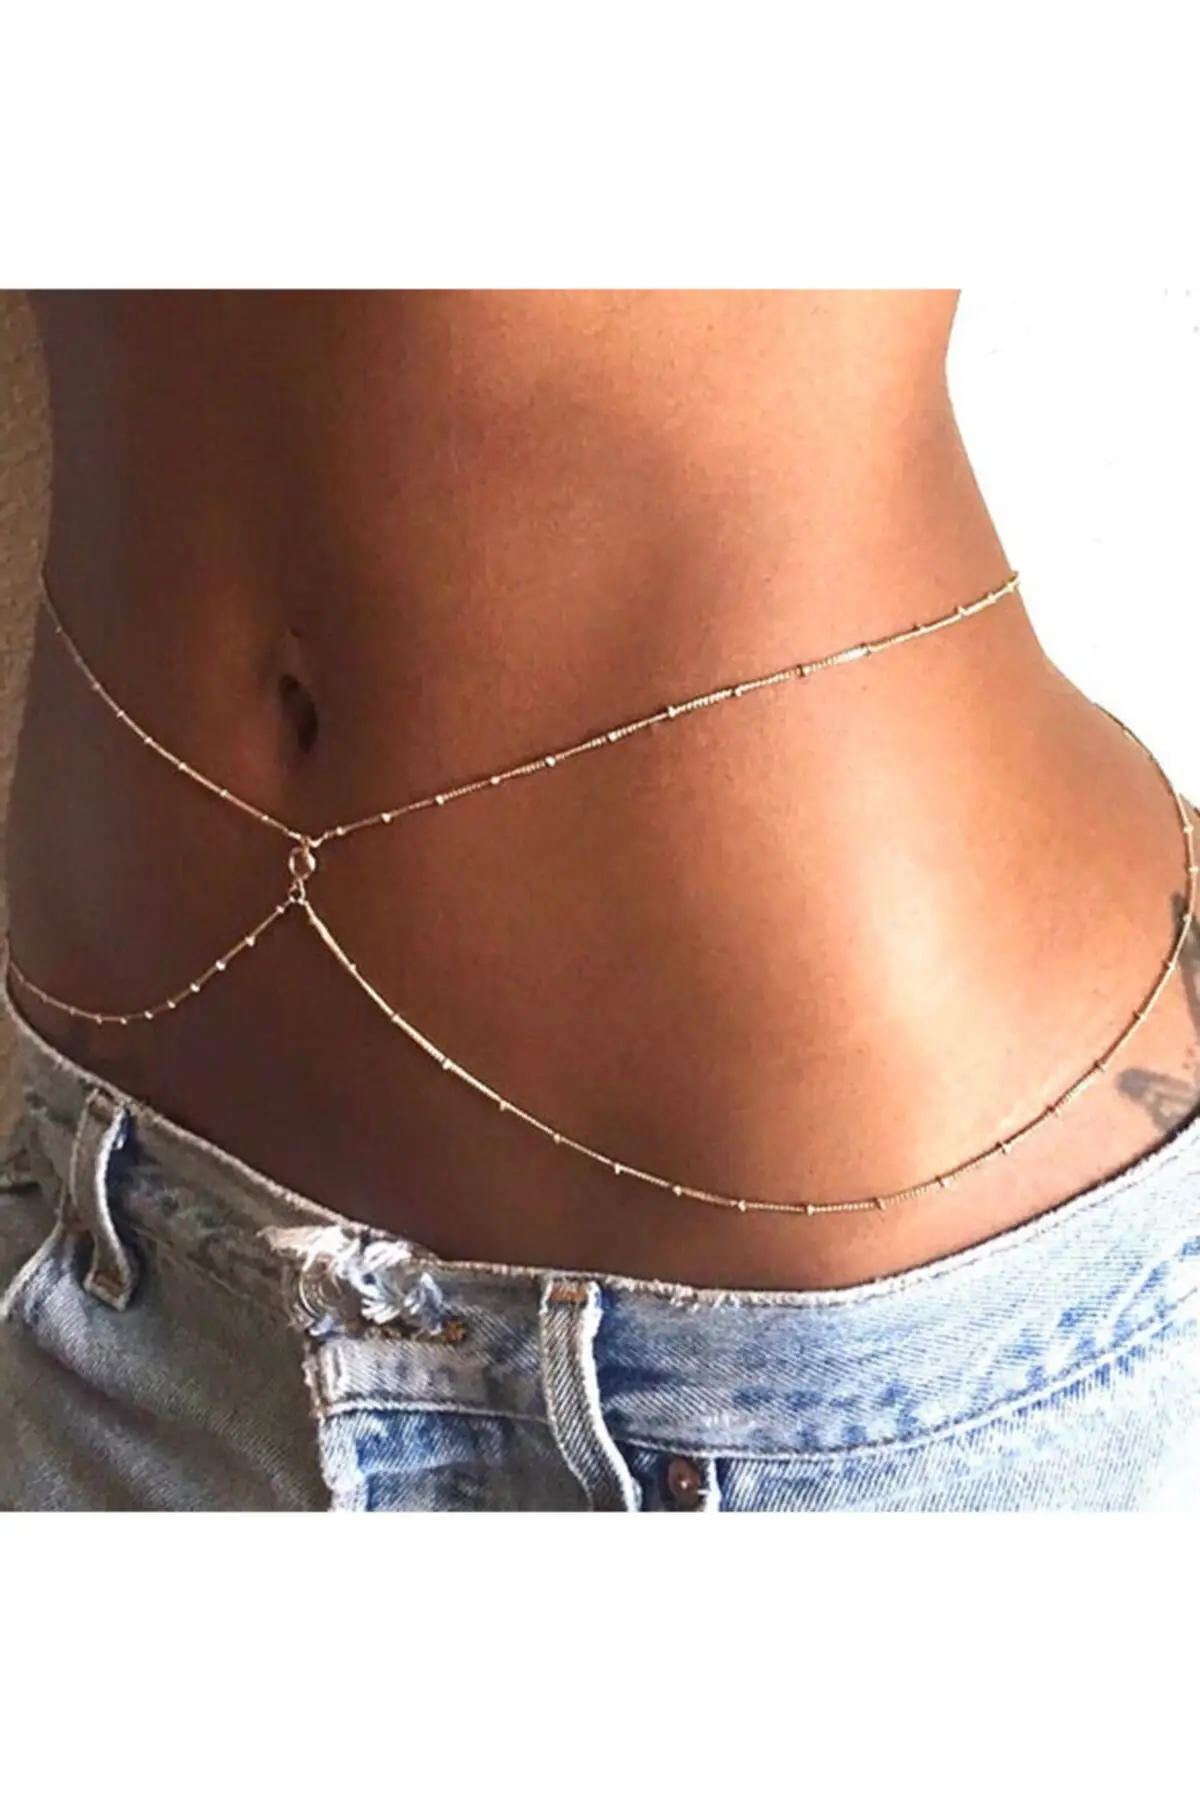 Tarnish And 2-Pair Gold Color Leni Waist Chain And Belly Jewelry, Waist Necklace Stylish Useful Majestic  2022 Trend Model